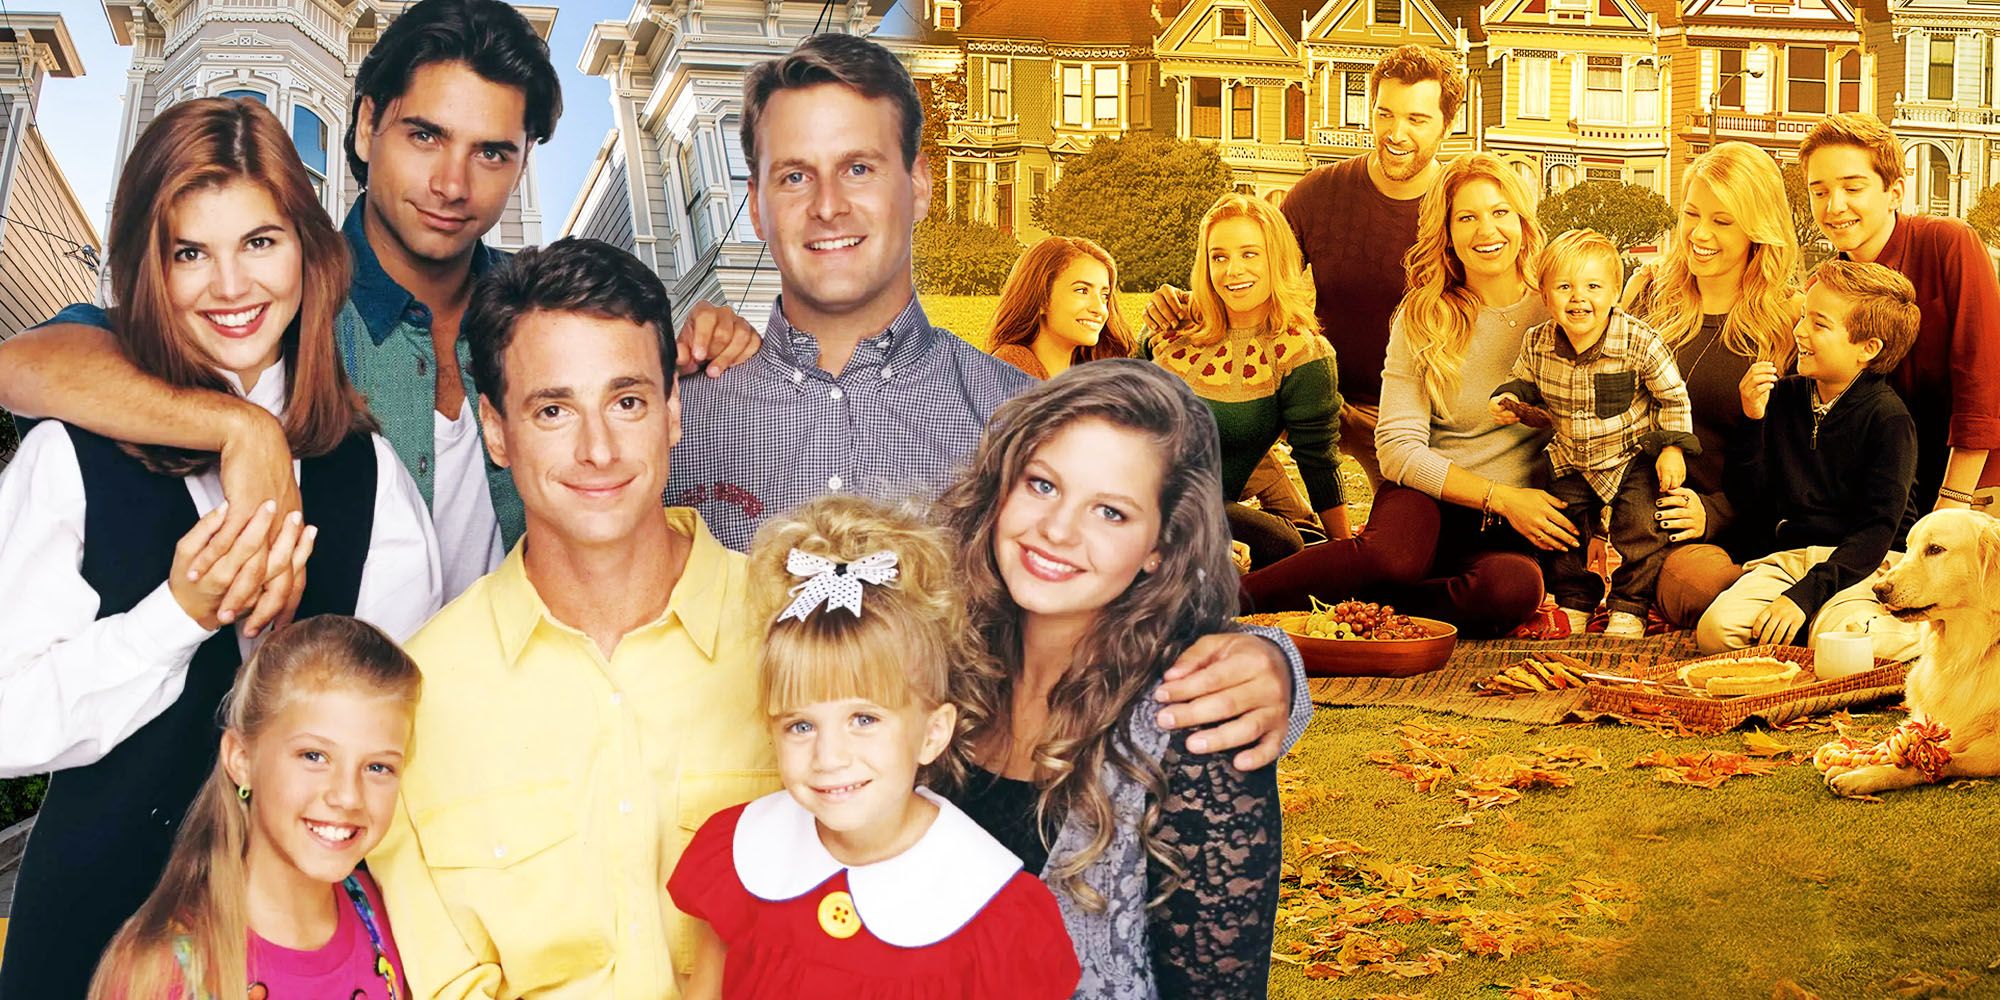 How Old Full House's Main Cast Were Compared To Fuller House